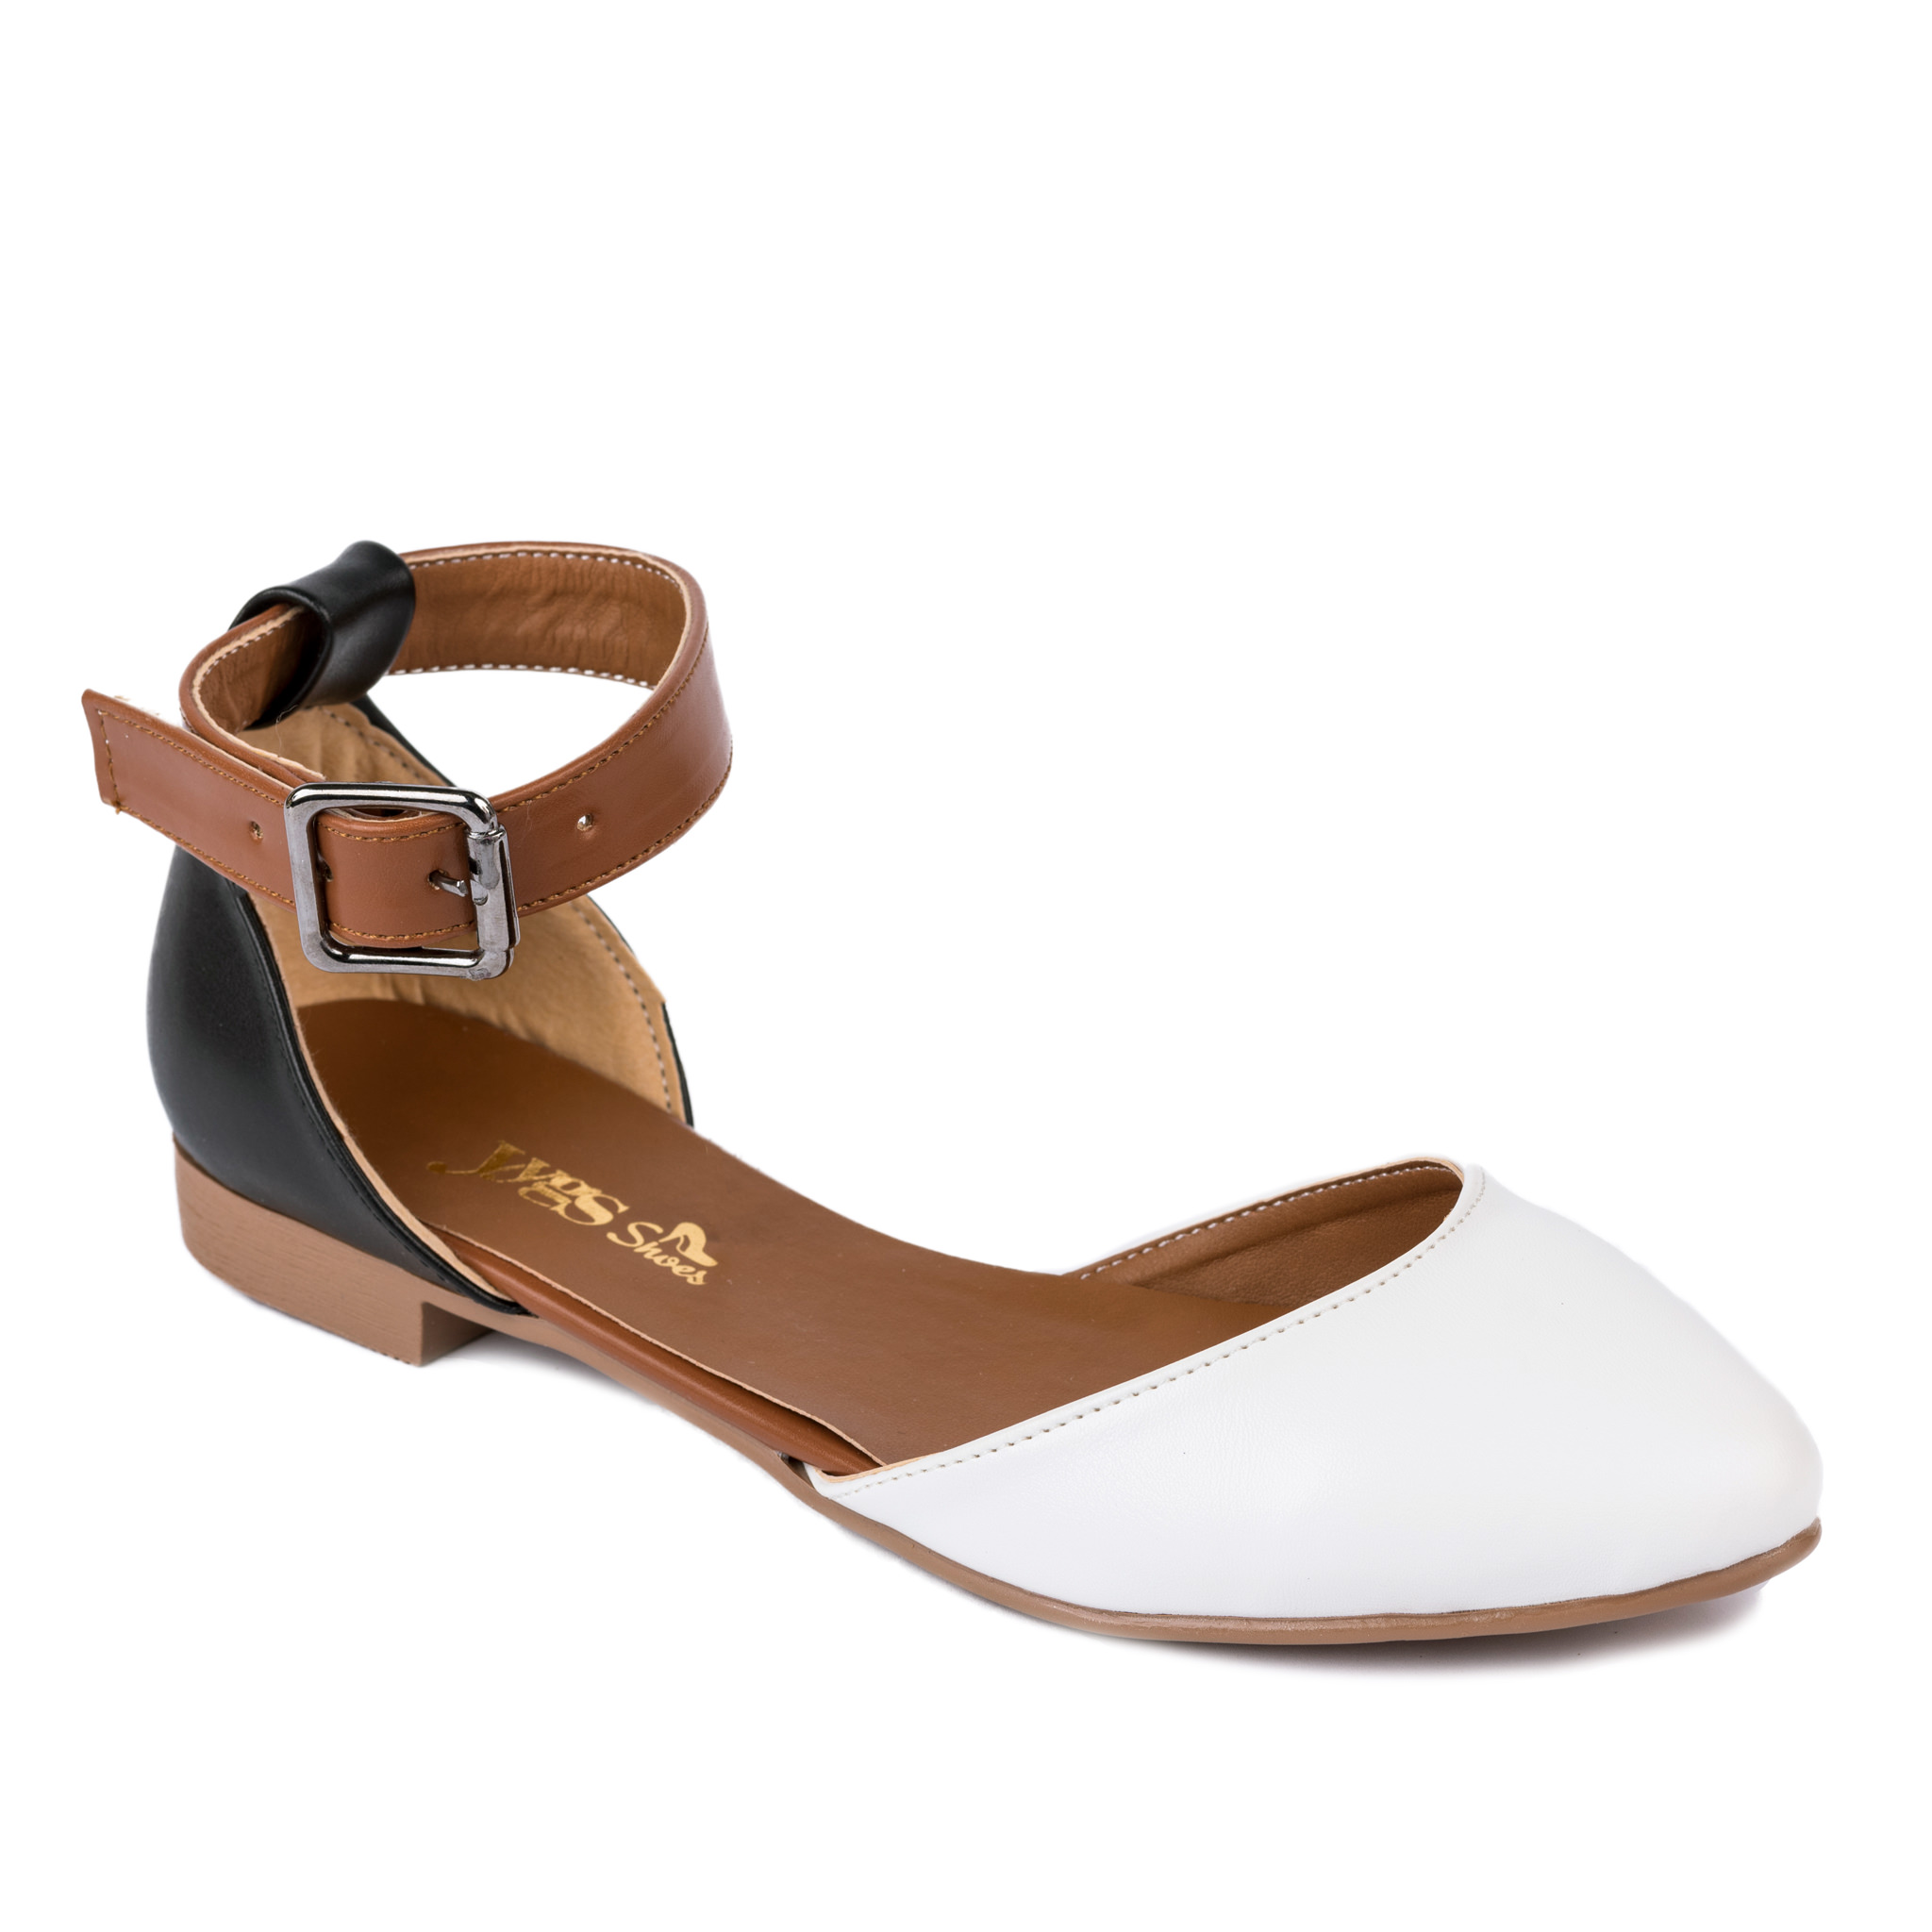 FLATS WITH BELT - BLACK/BROWN/WHITE